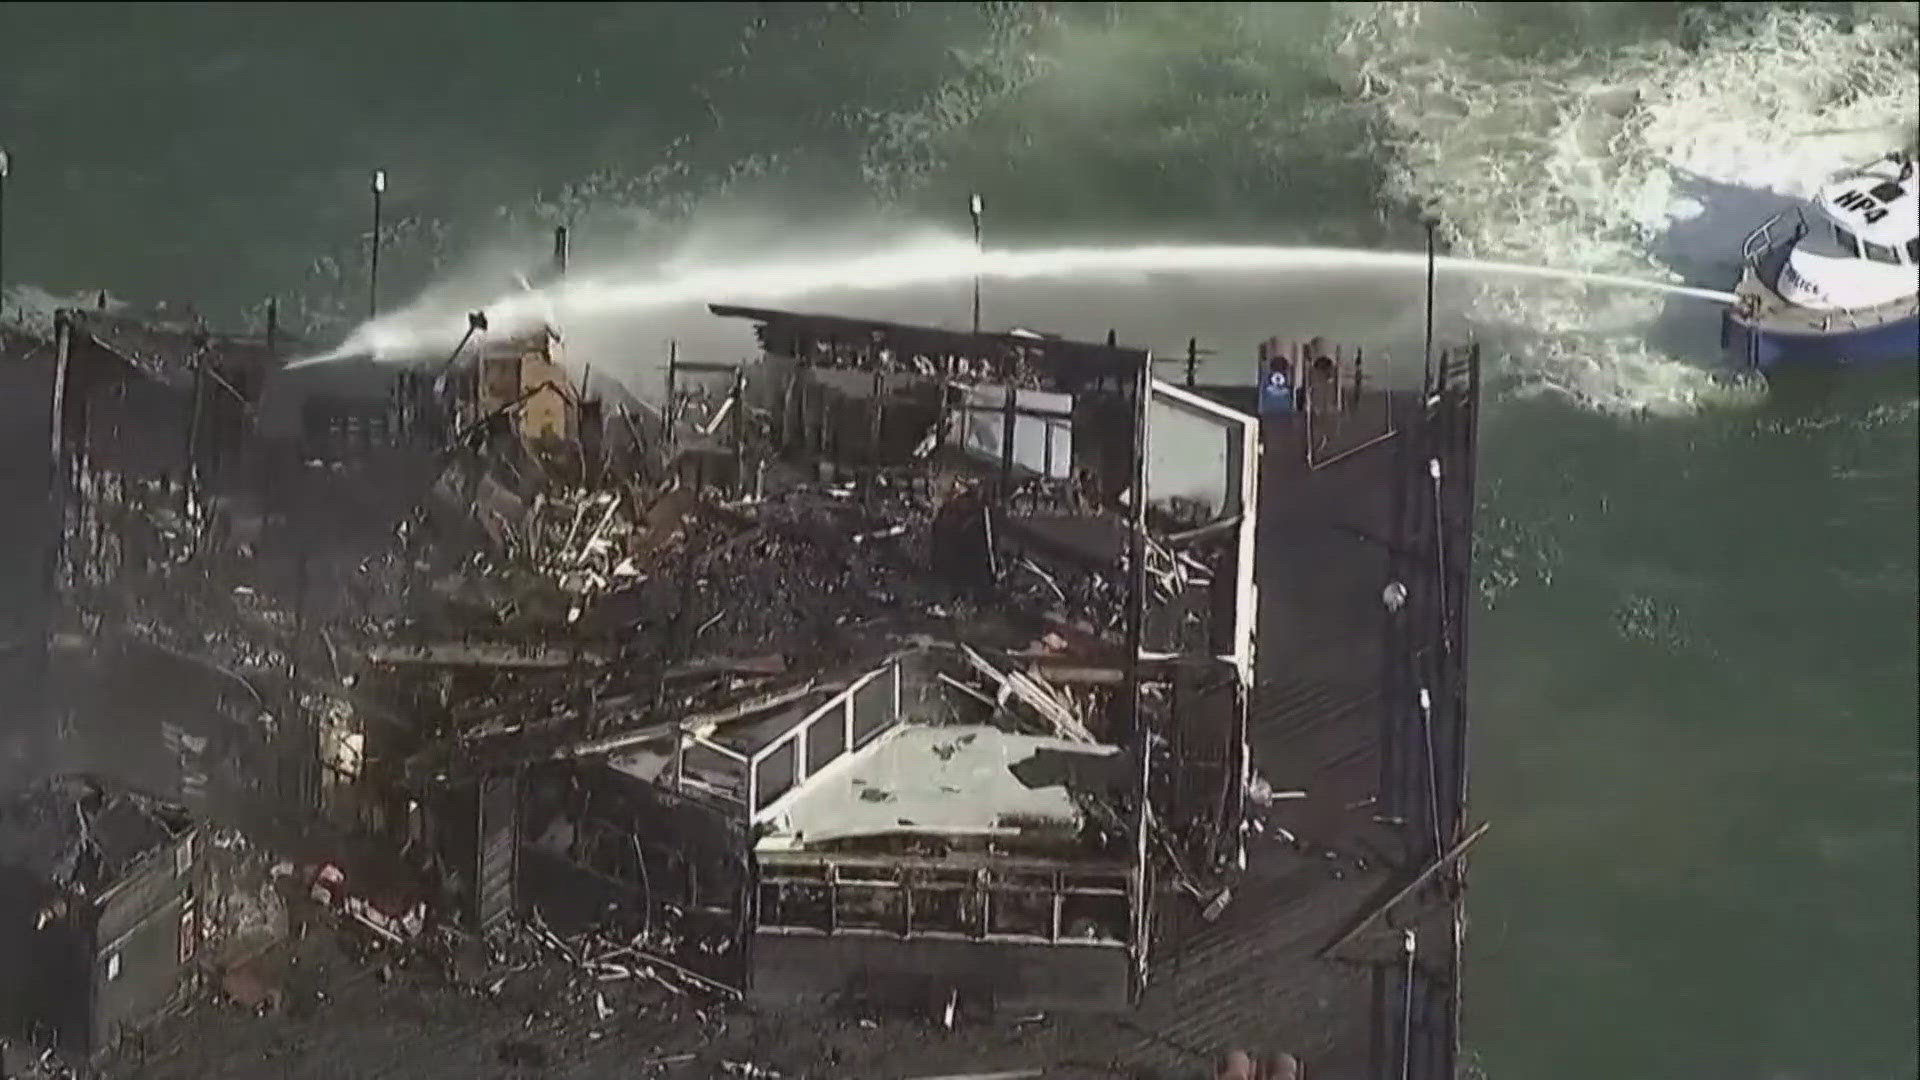 Oceanside Fire officials said as of 7 p.m. on Friday, the fire is declared 'under control'.